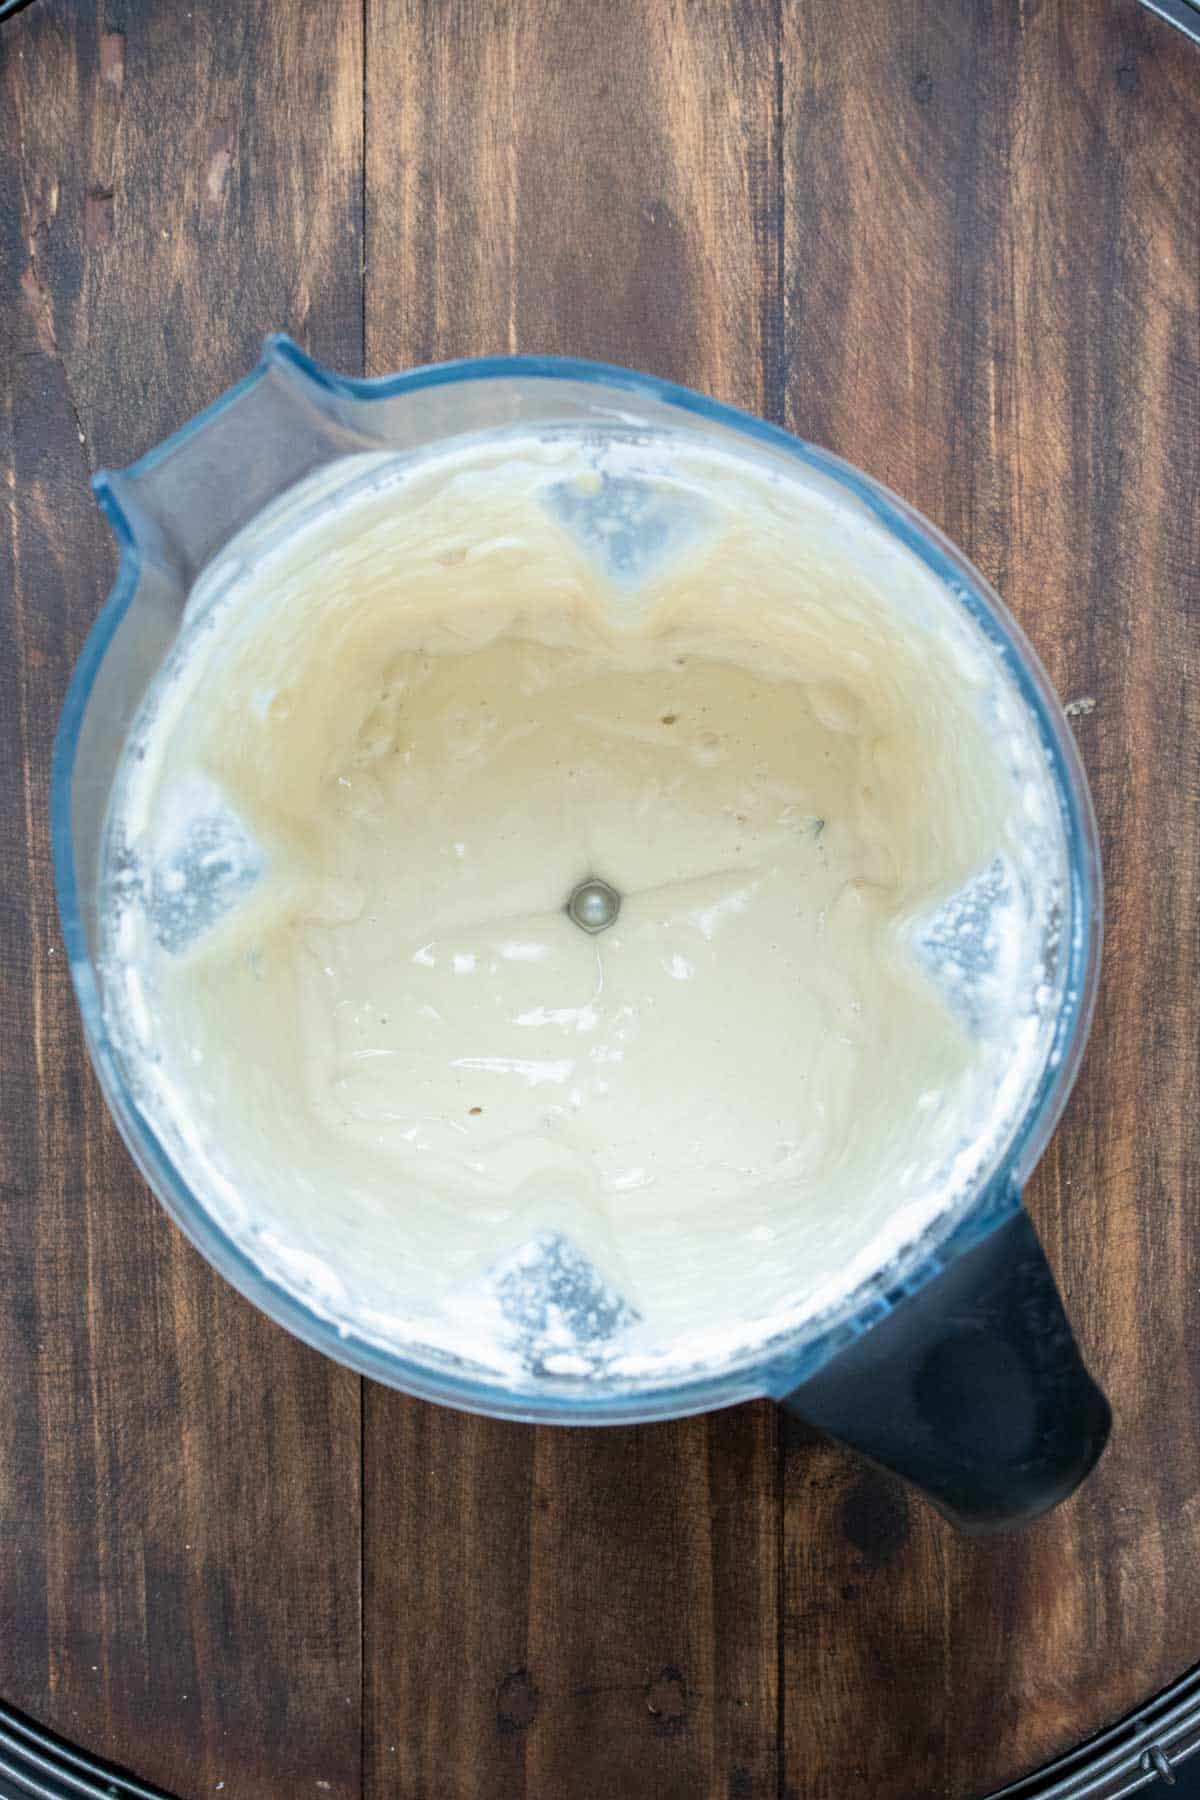 Top view of a blender with creamy sauce inside